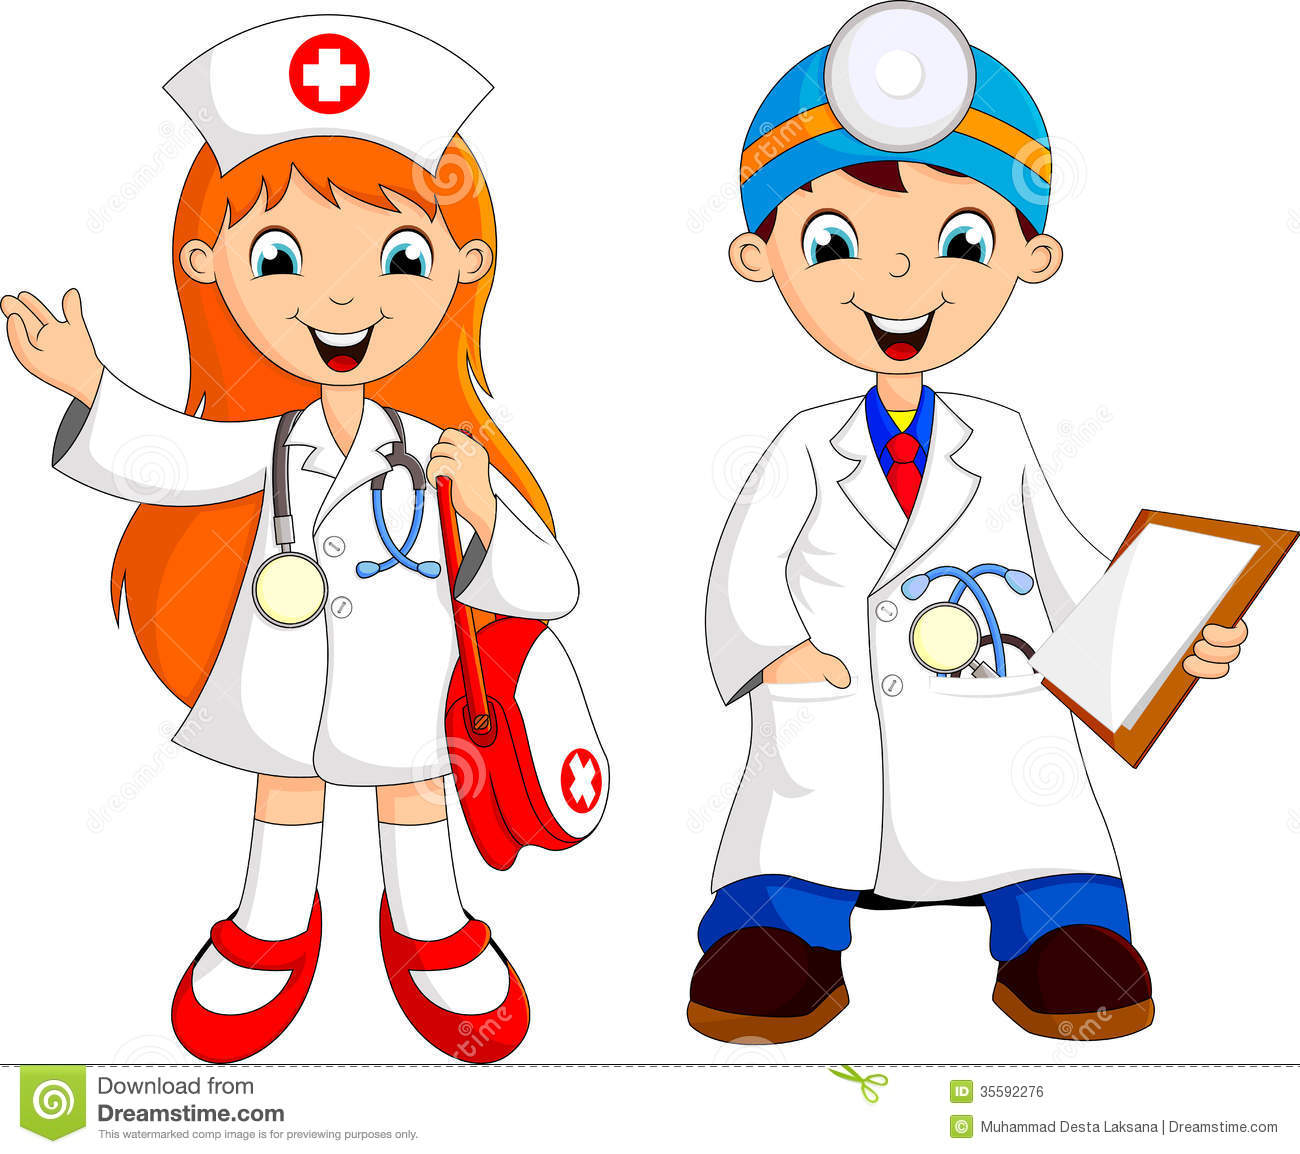 Female doctor clipart free cl